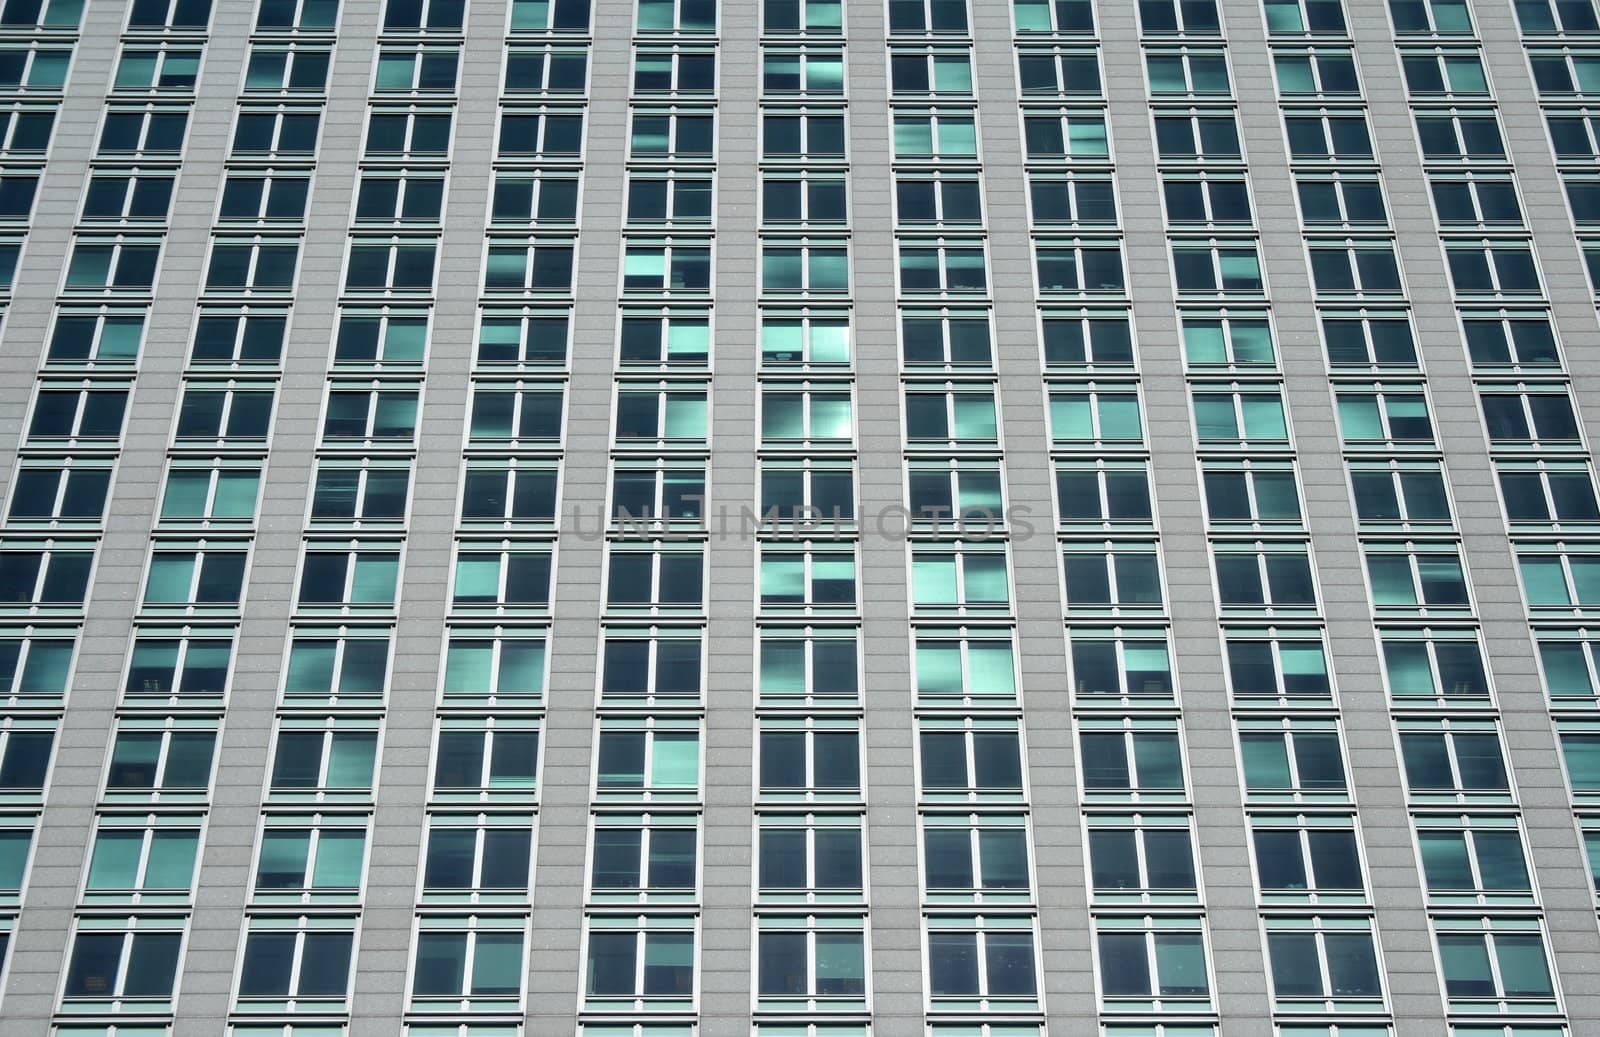 Rows of windows with green reflections by anikasalsera